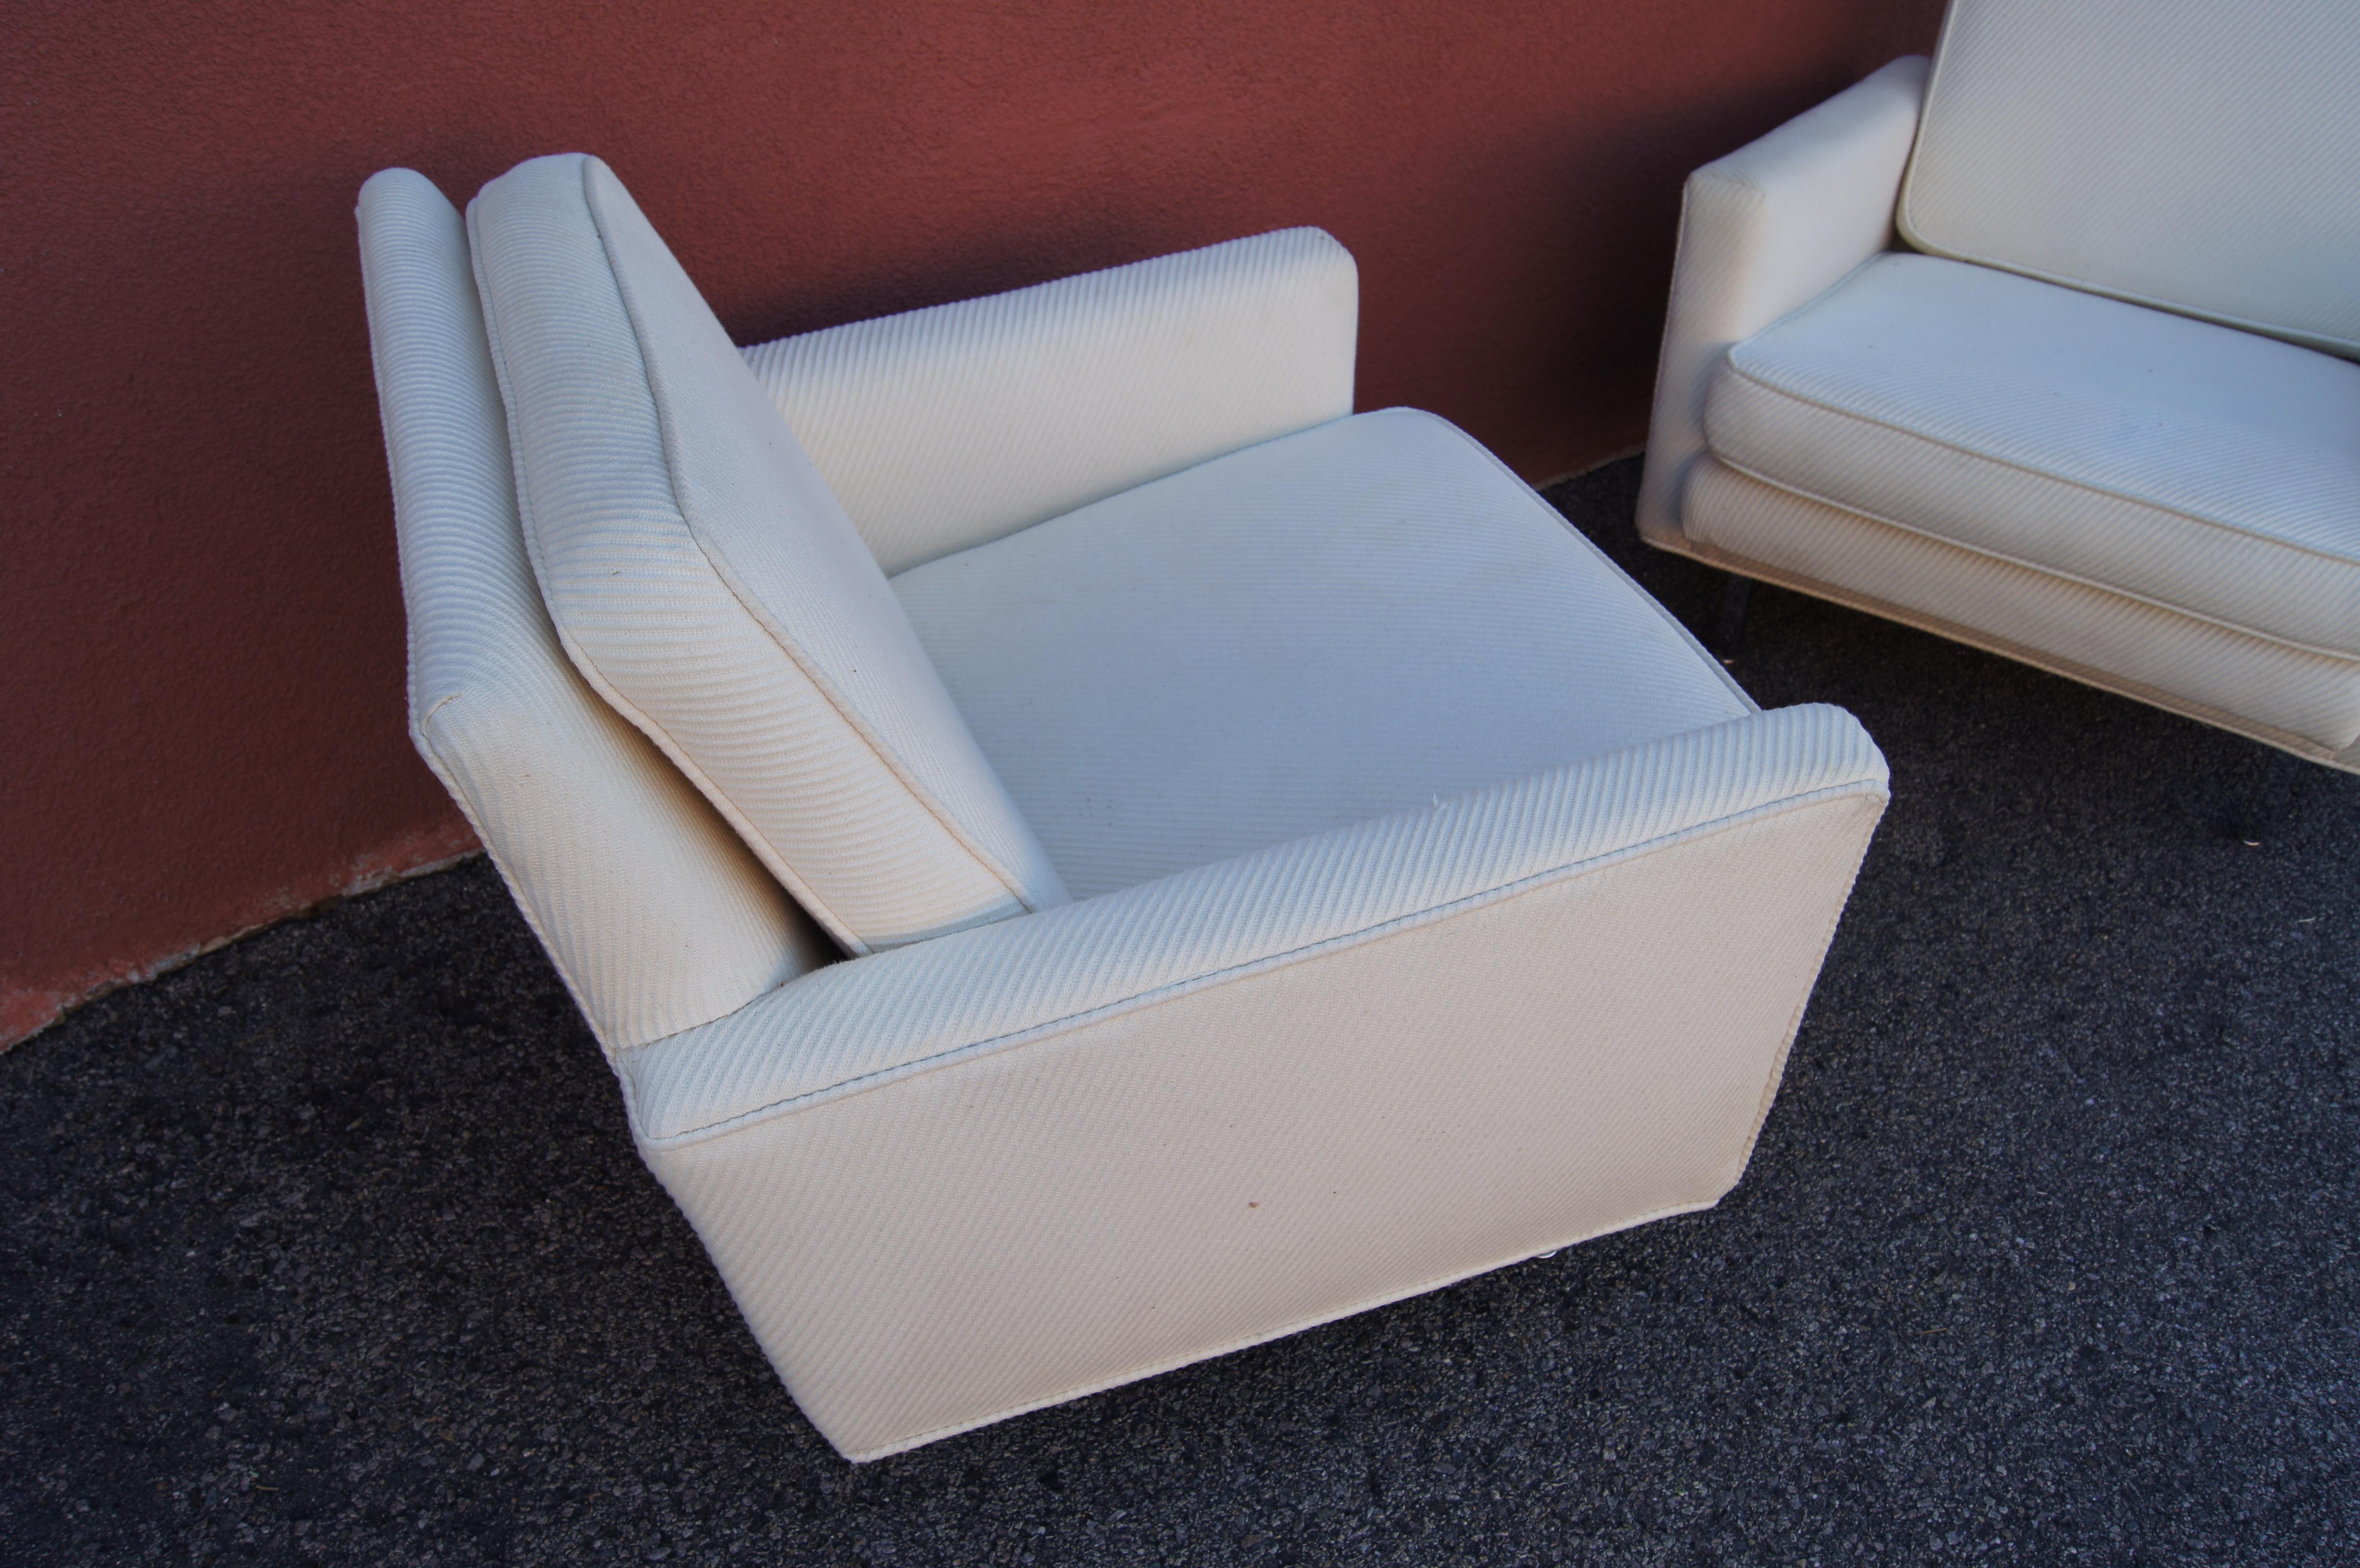 Pair of Lounge Chairs, Model 5681, by George Nelson for Herman Miller In Good Condition For Sale In Dorchester, MA